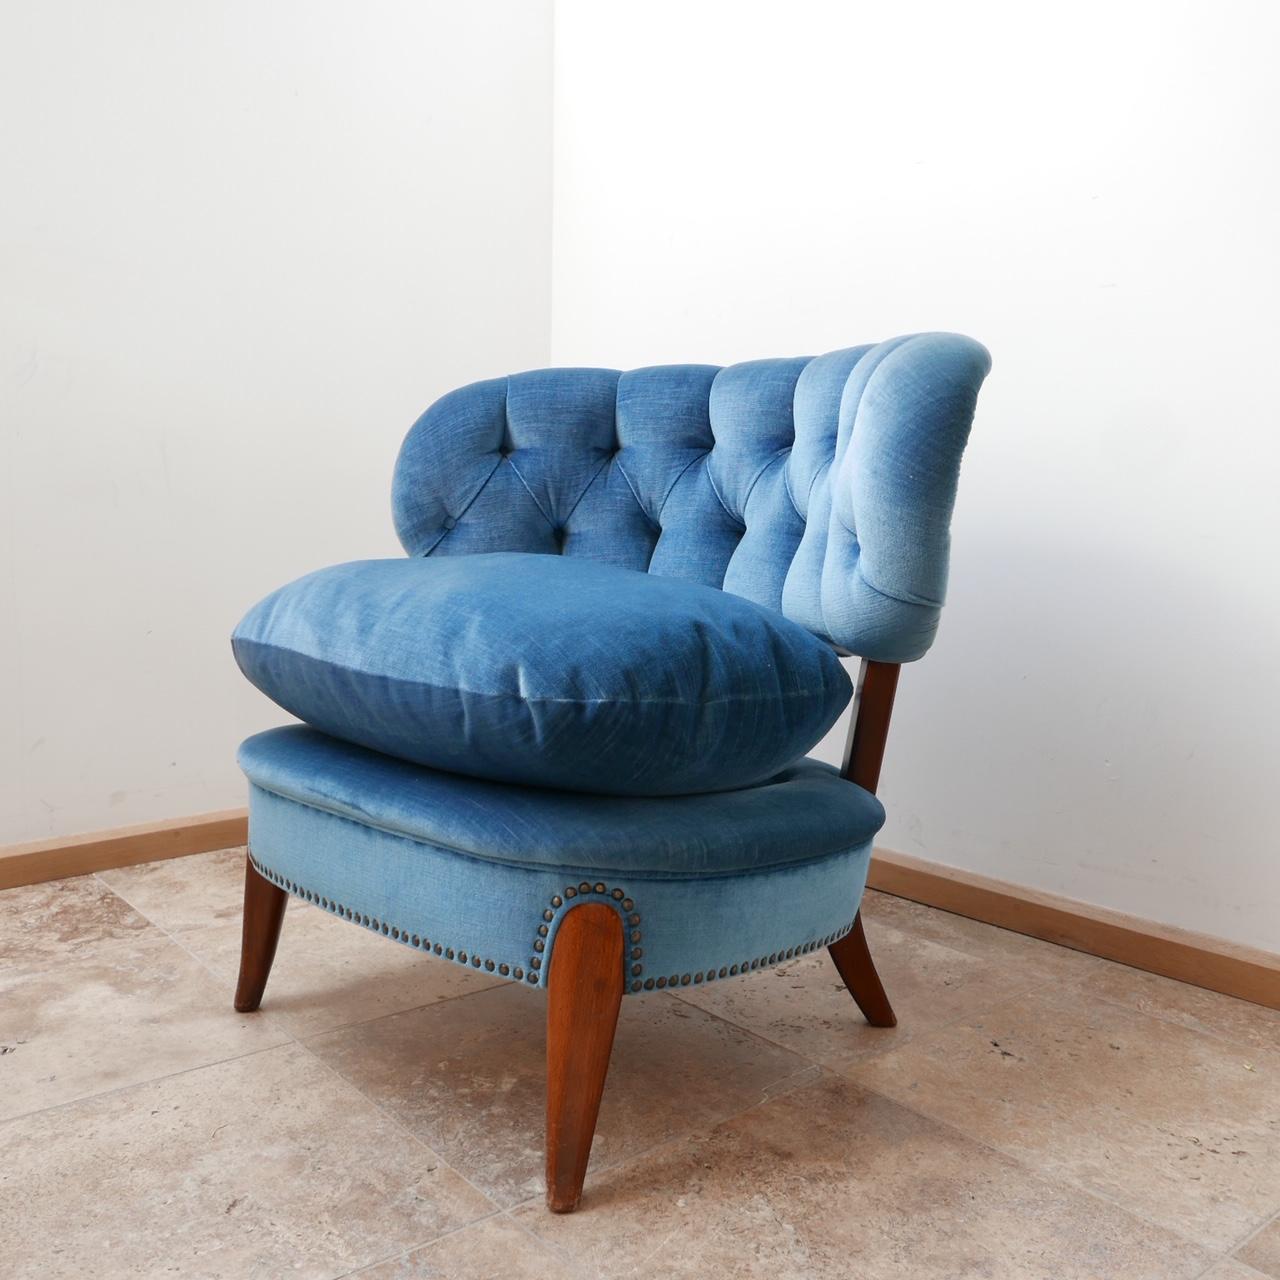 A lounge chair by Otto Schulz. 

Sweden, c1940s. 

Generous open wide design. 

Upholstered in blue plush fabric with characteristic thick cushion which remains in near perfect condition. 

Produced by Boet.

Dimensions: 85 W x 57 D x 48